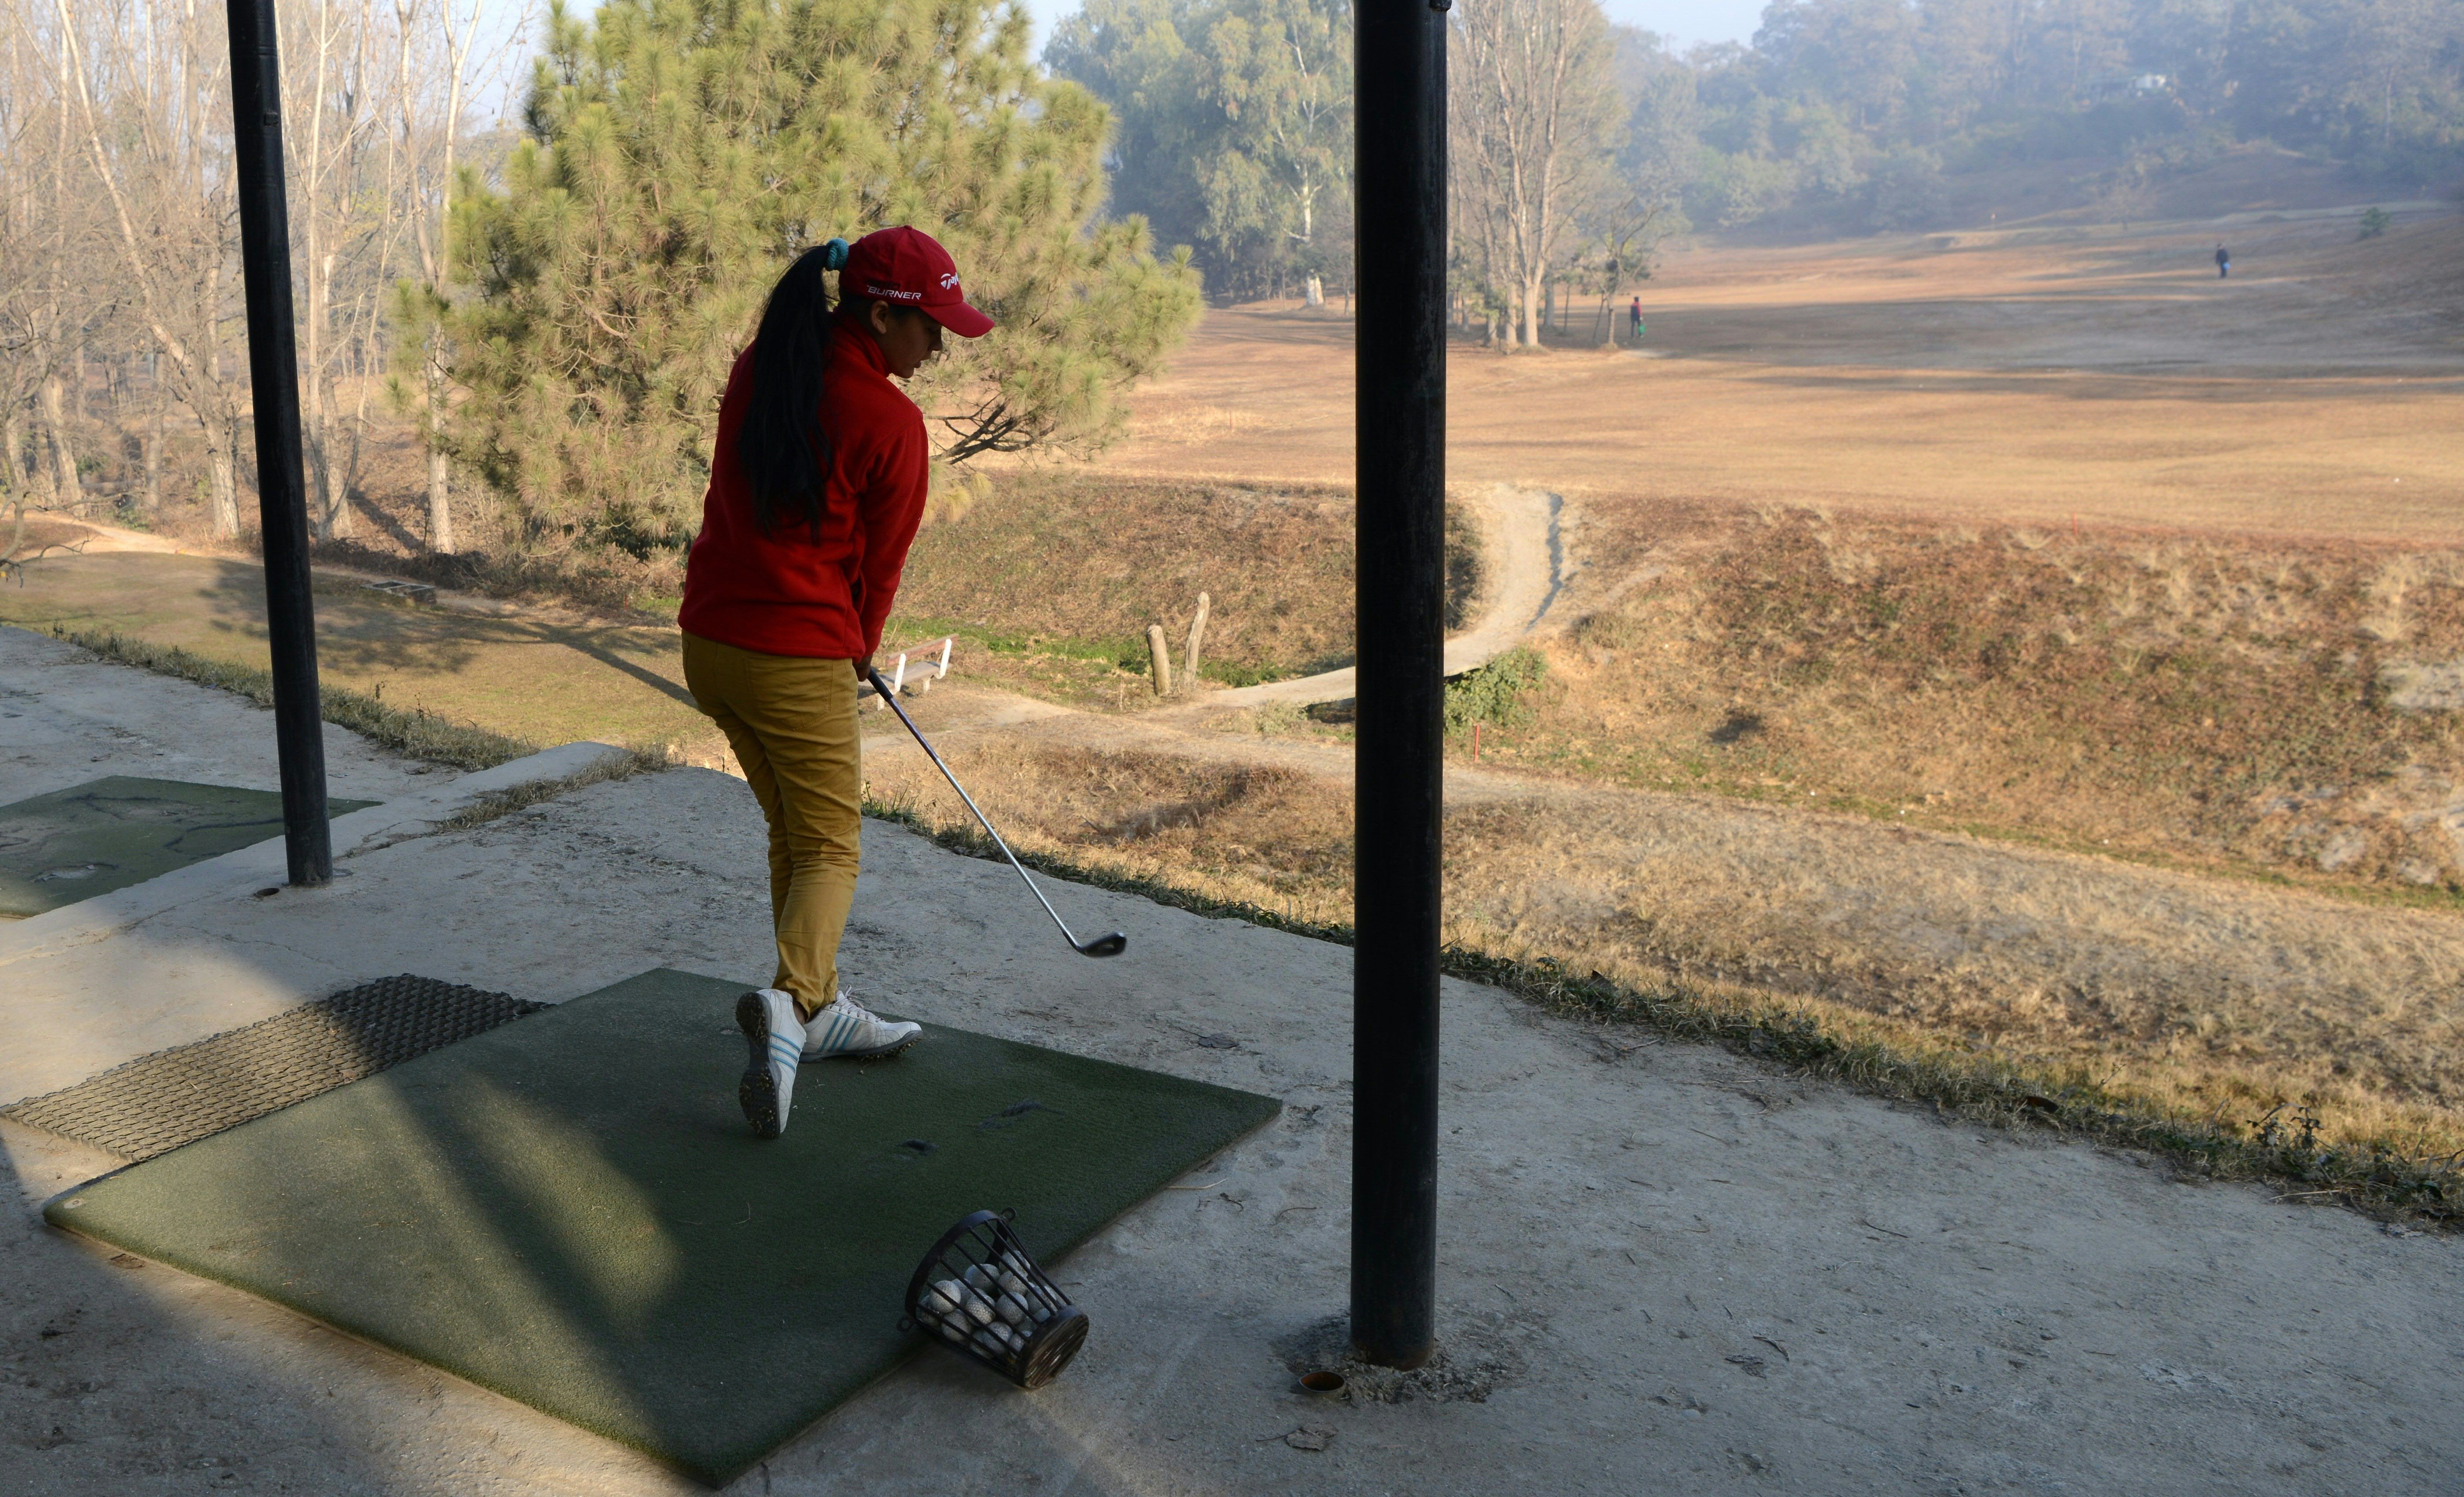 Pratima Sherpa recalls growing up in a hut next to a golf course in Kathmandu, her first taste of international competition this summer and her dream – to become Nepal’s first female professional golfer